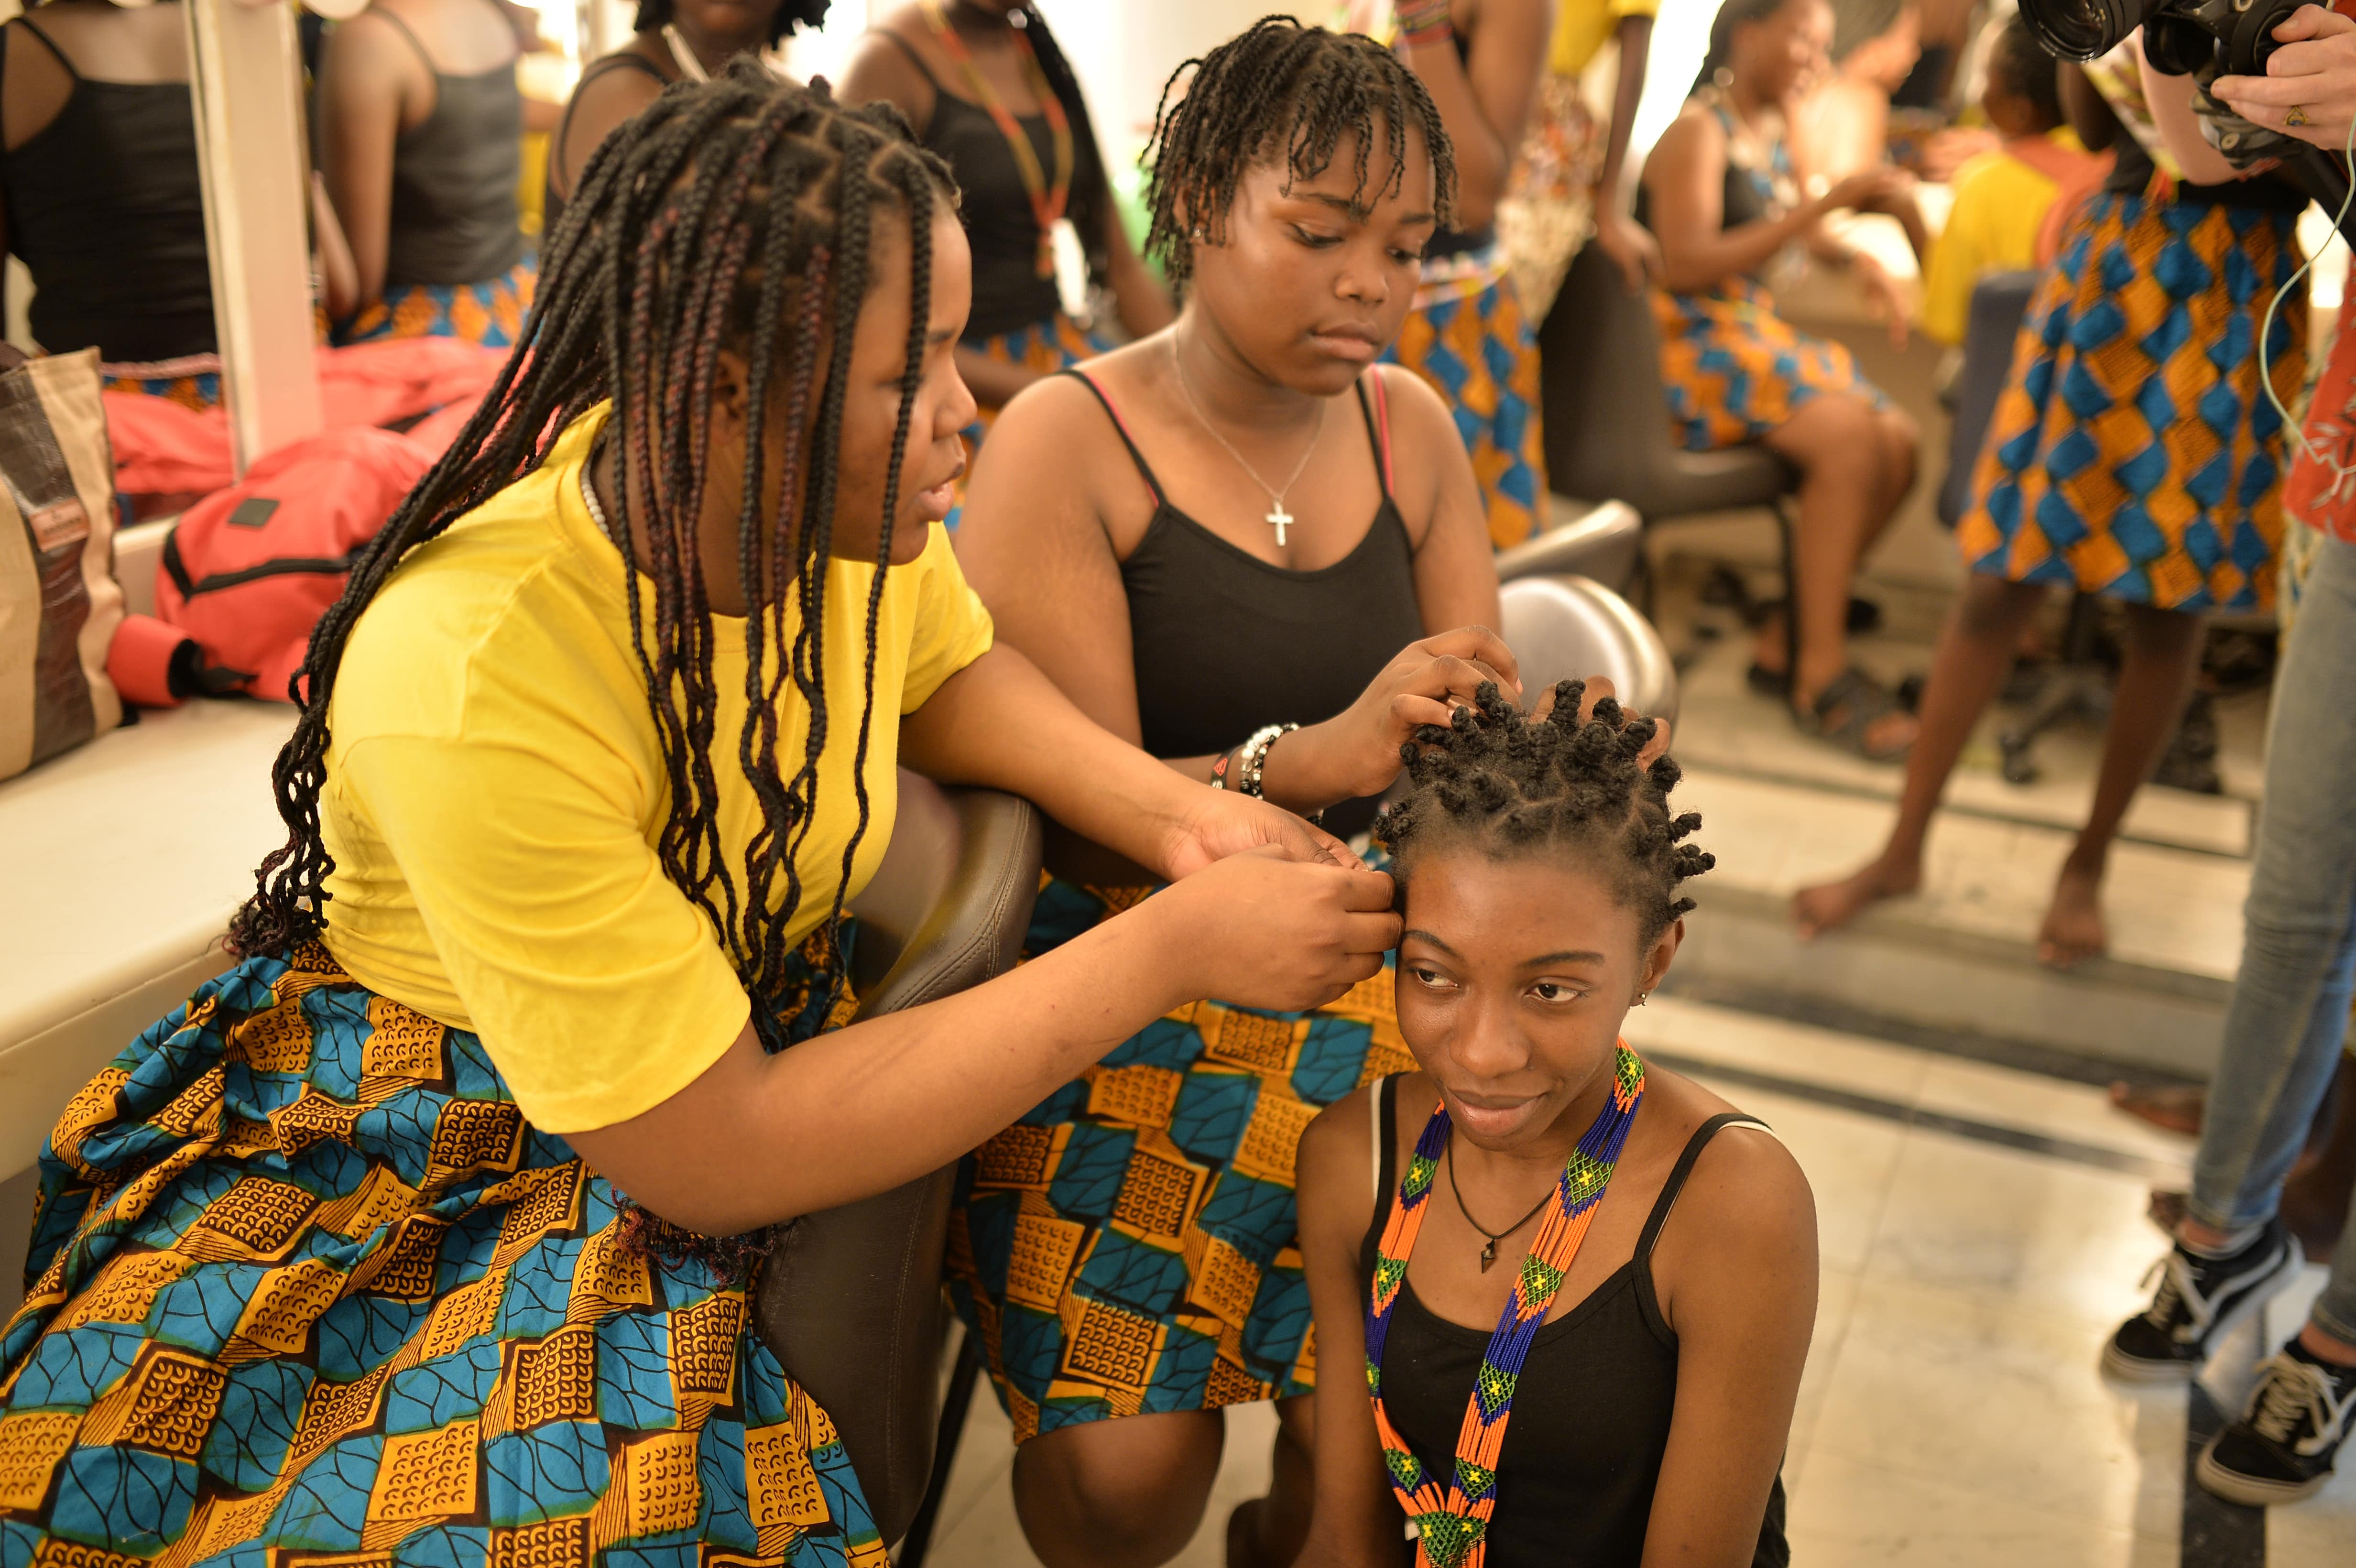 Two young women braid another's hair backstage.